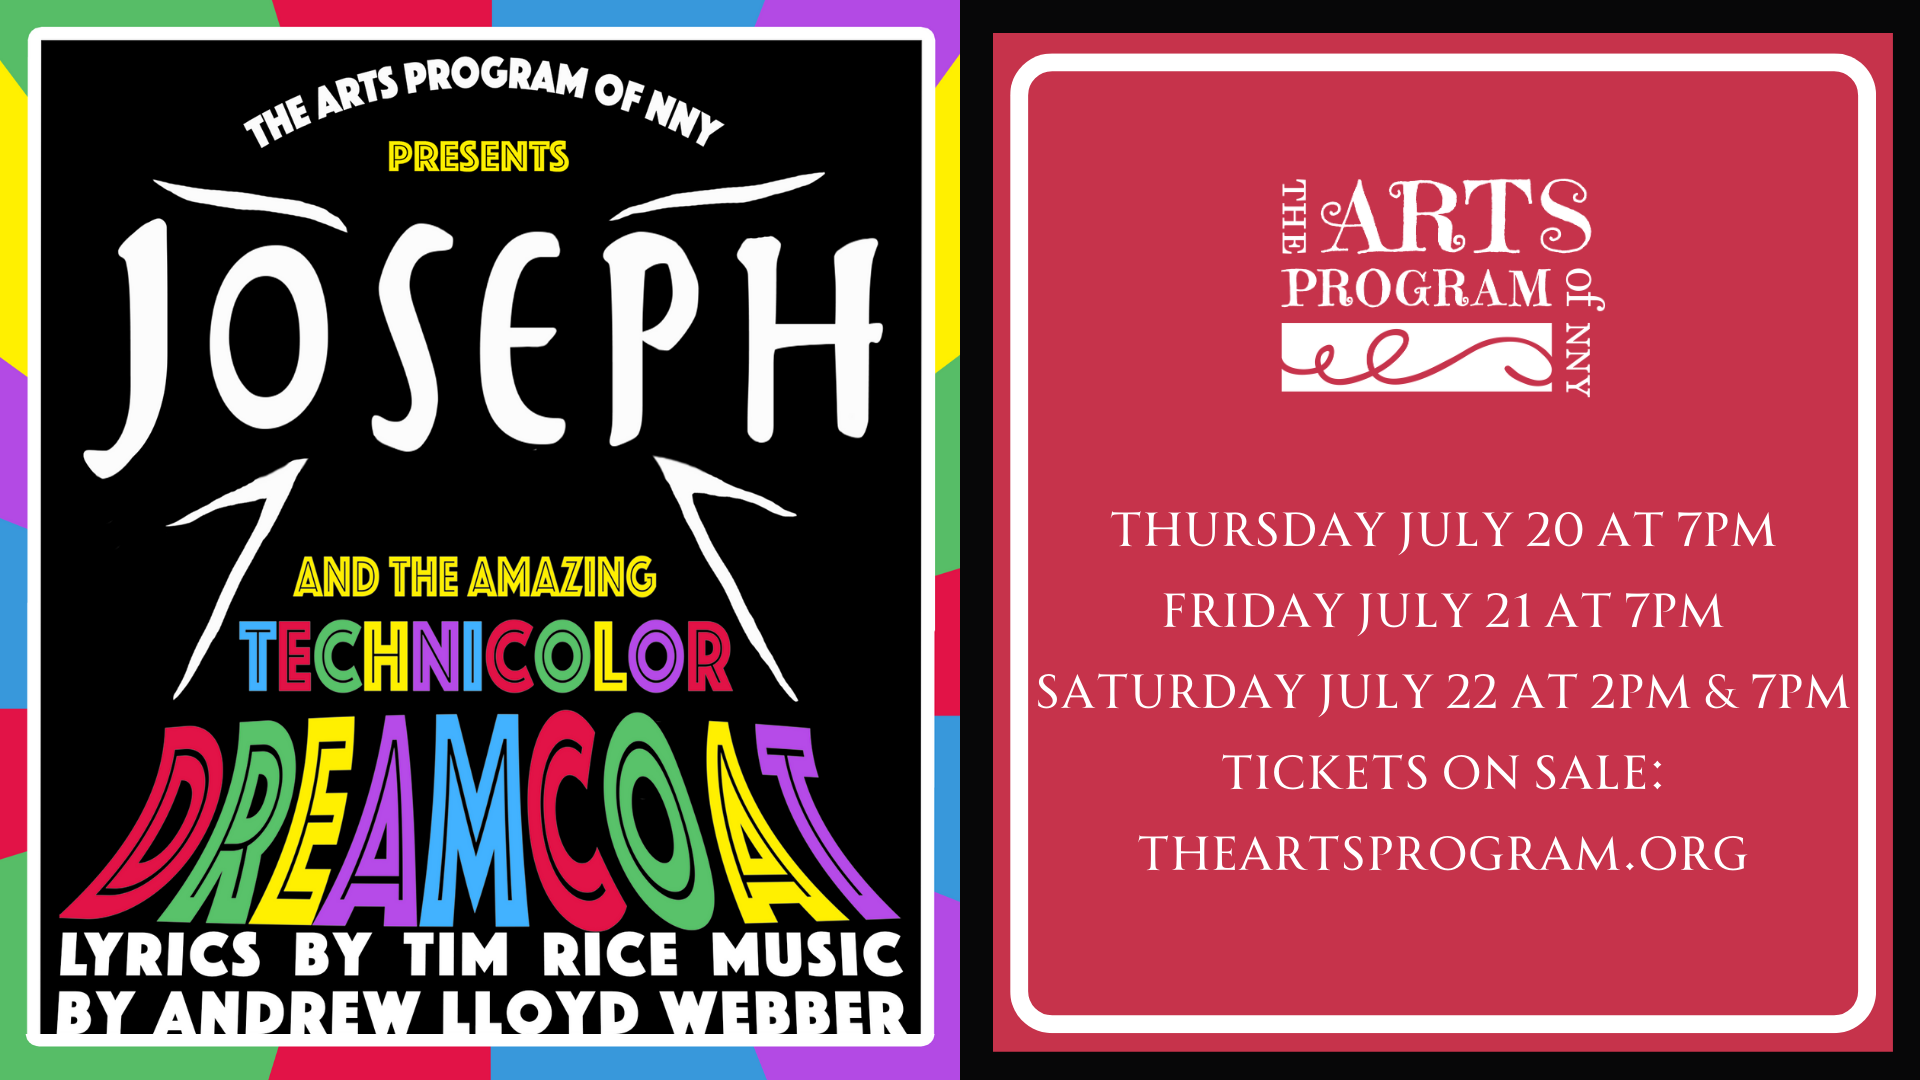 Thursday July 20 at 7pm Friday July 21 at 7pm Saturday July 22 at 2pm & 7pm Tickets on sale TheArtsP image